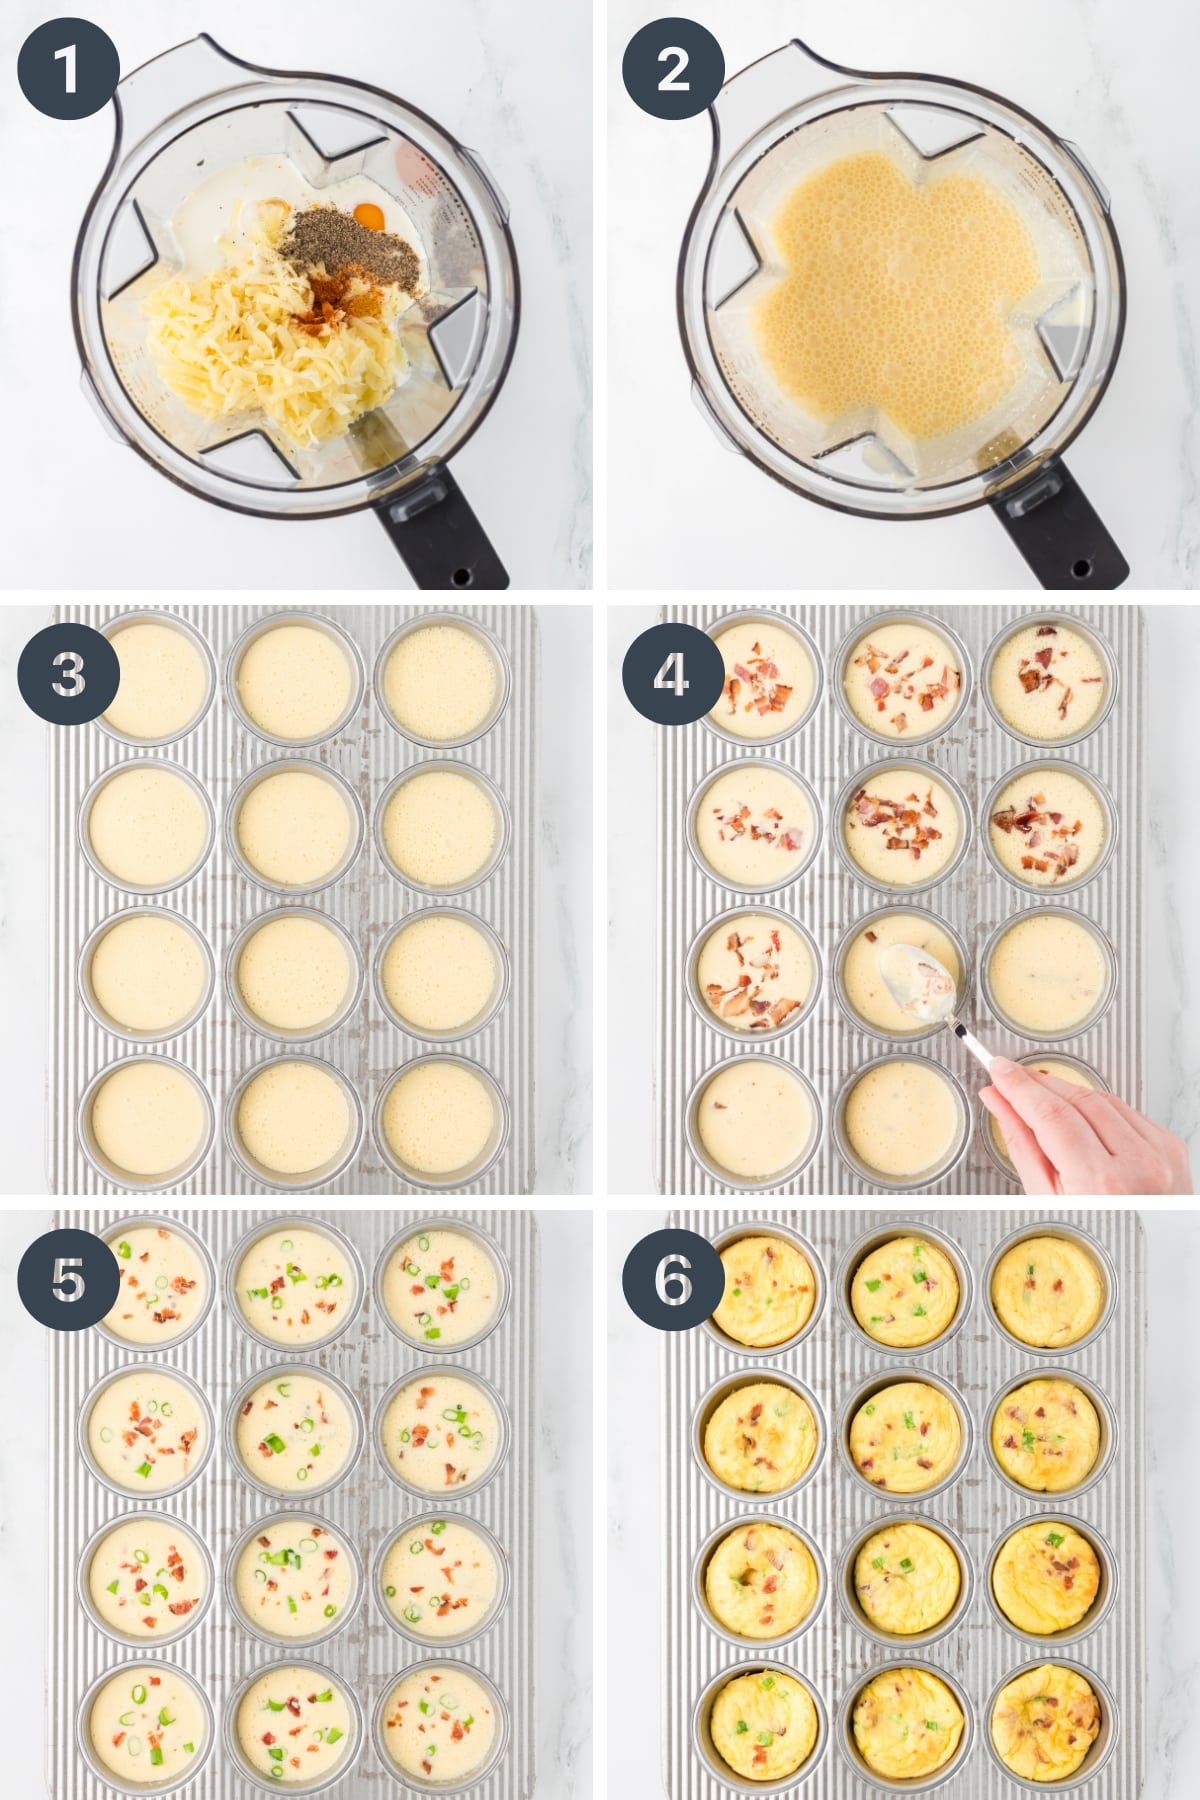 Blending together eggs, cottage cheese, and cheese, then pouring them into muffin cups with bacon to bake until cooked through.